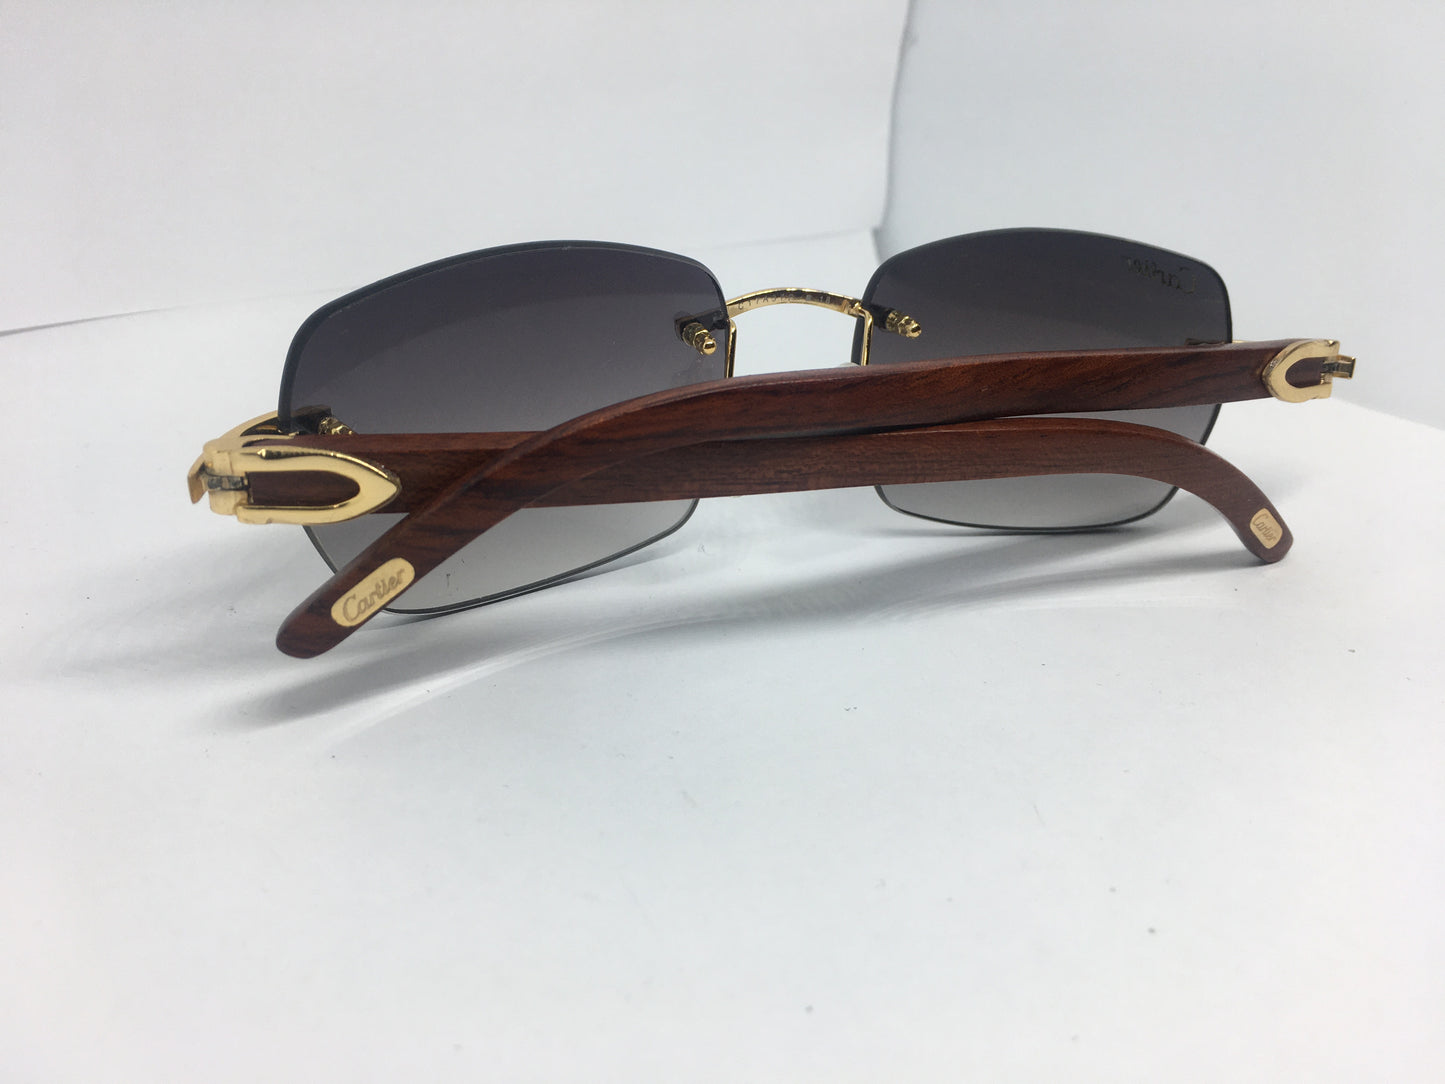 Gold Decor C Woods with Smoke Grey Square Lenses